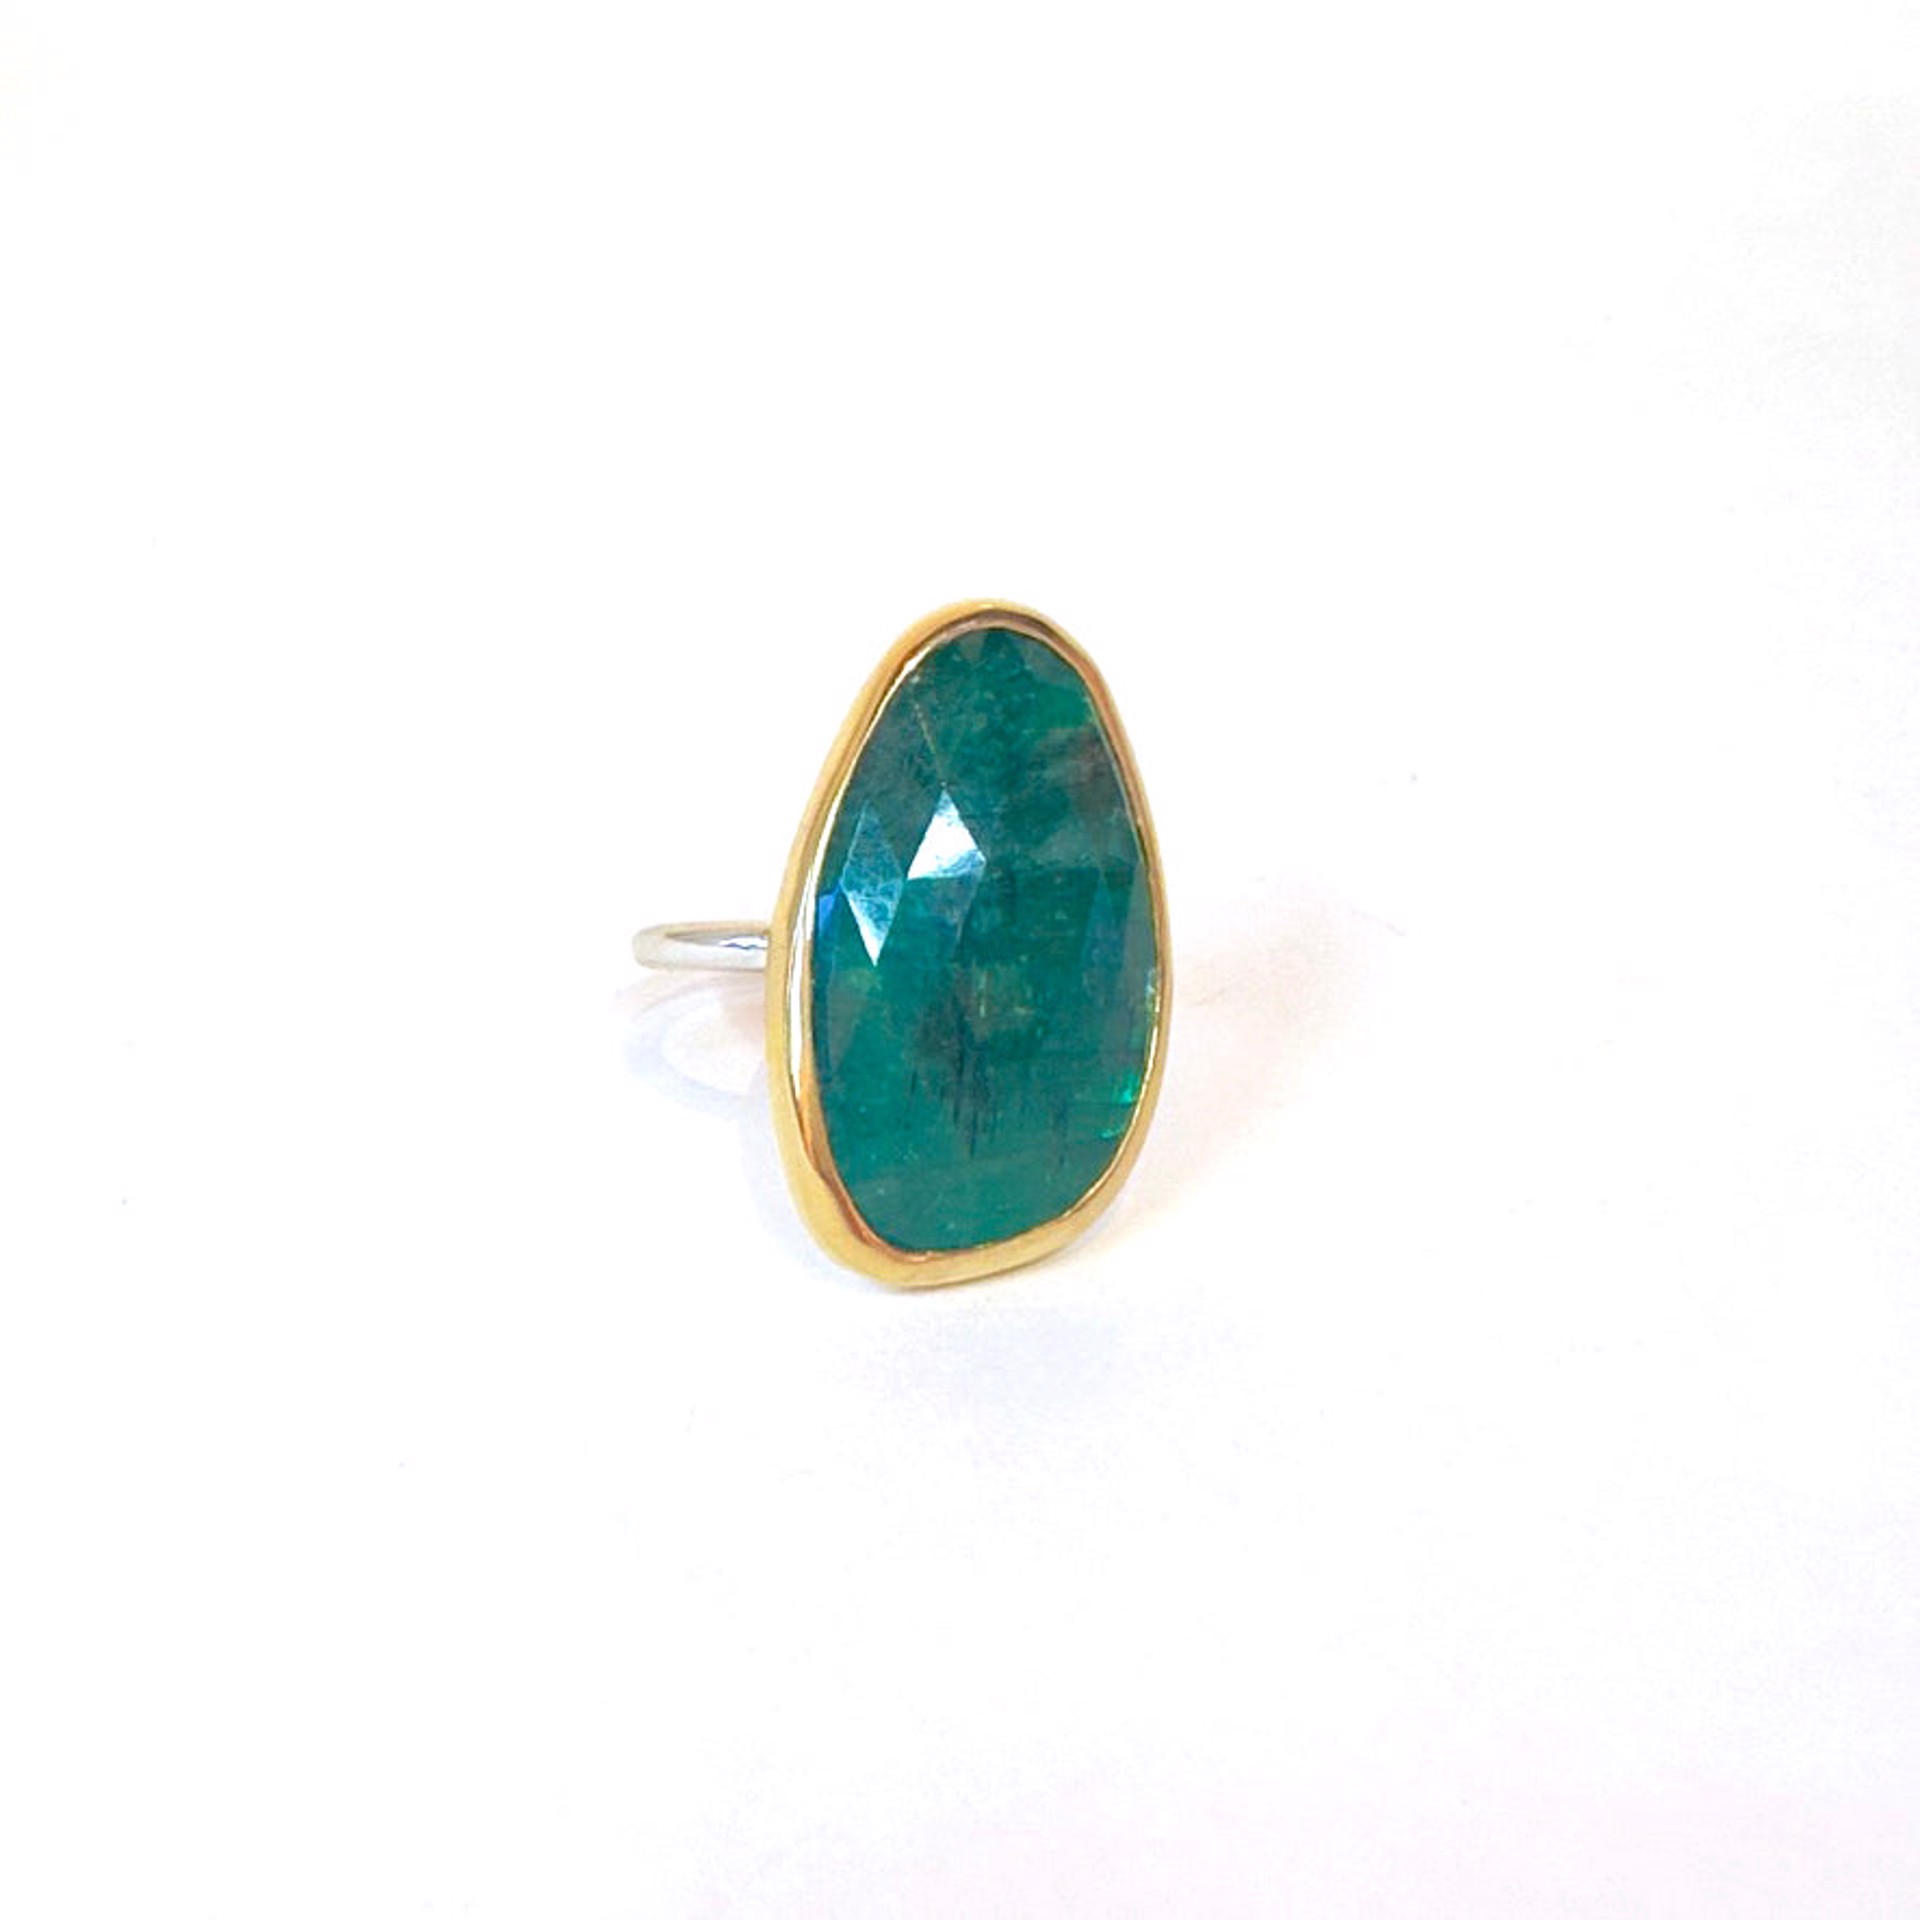 Emerald Ring with 18k gold by Sara Thompson